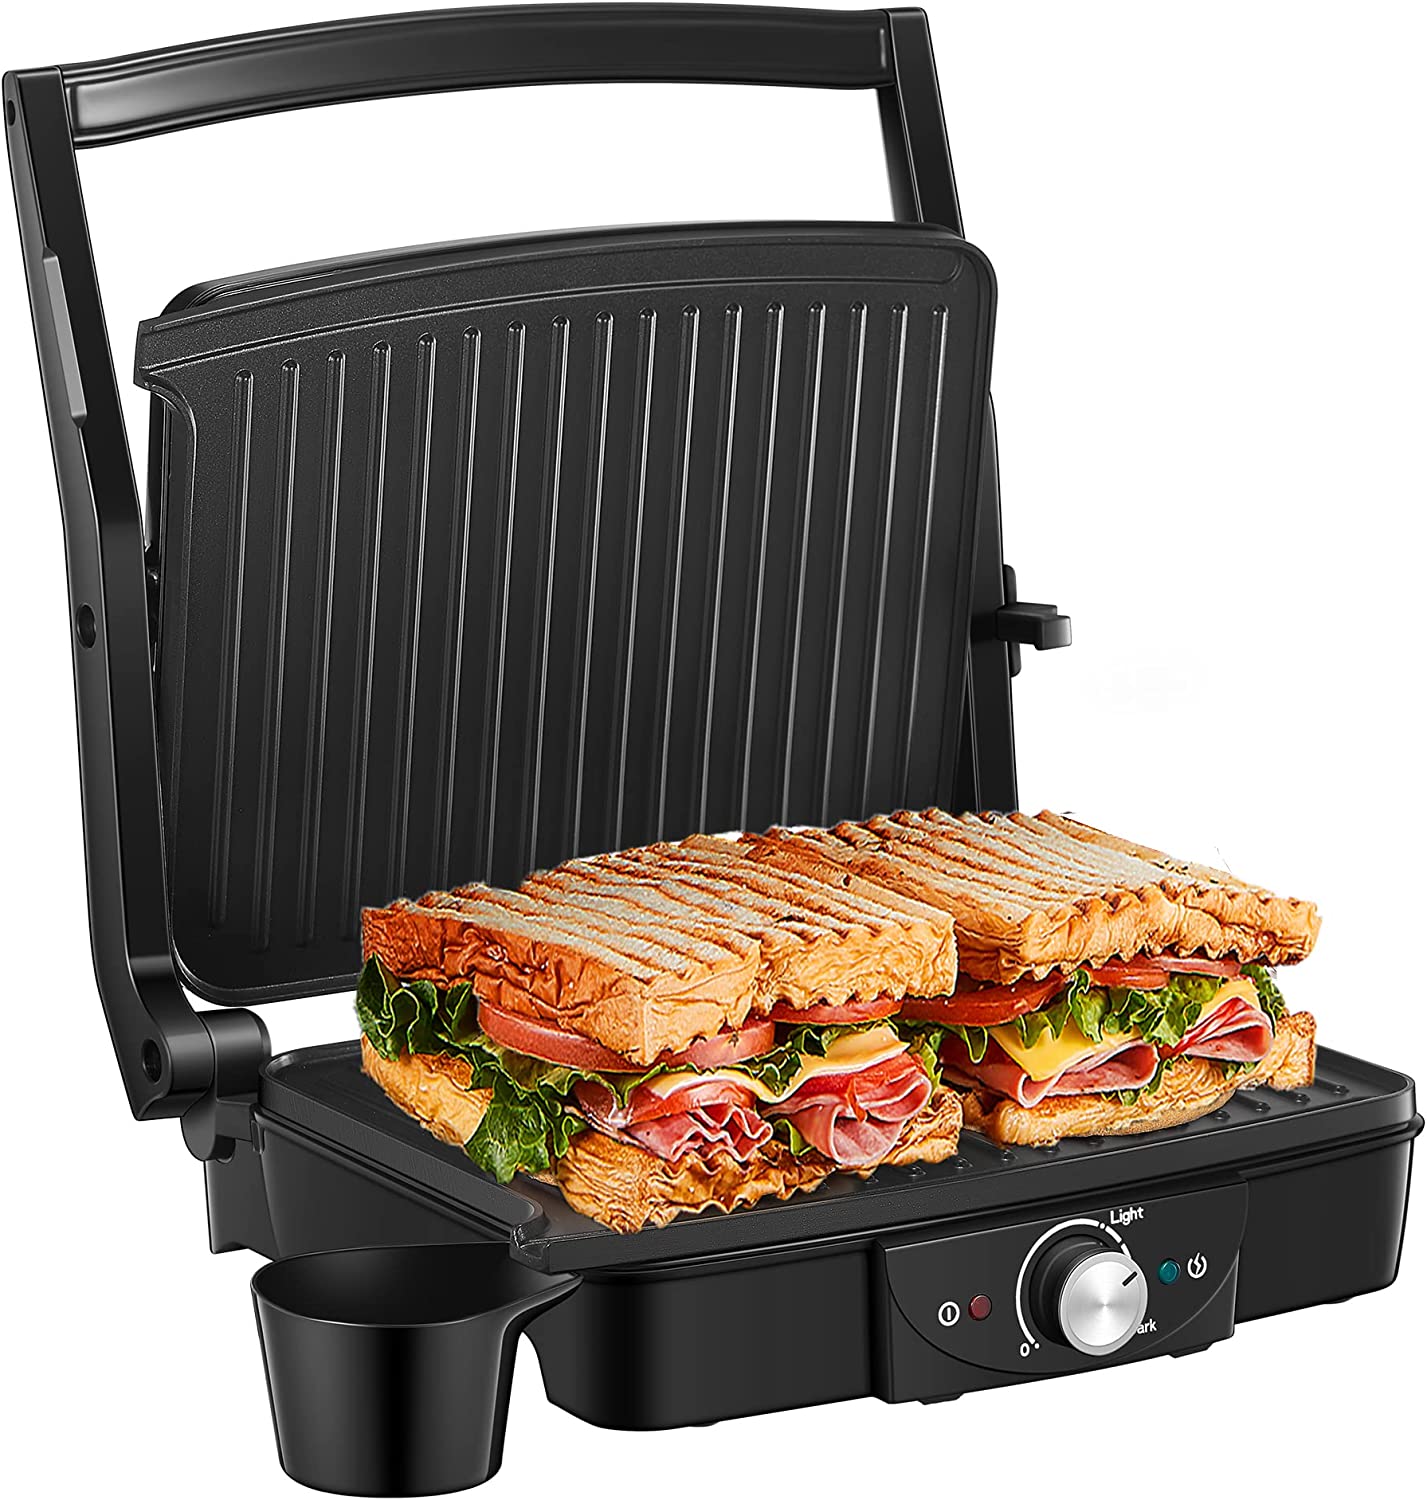 Generic Electric Table Grill for Double-Sided 2000 W, Contact Grill 180 Degree Opening, Electric Grill for Panini, Toasts, Steak, Vegetables, Sandwich, Adjustable Temperature Controller